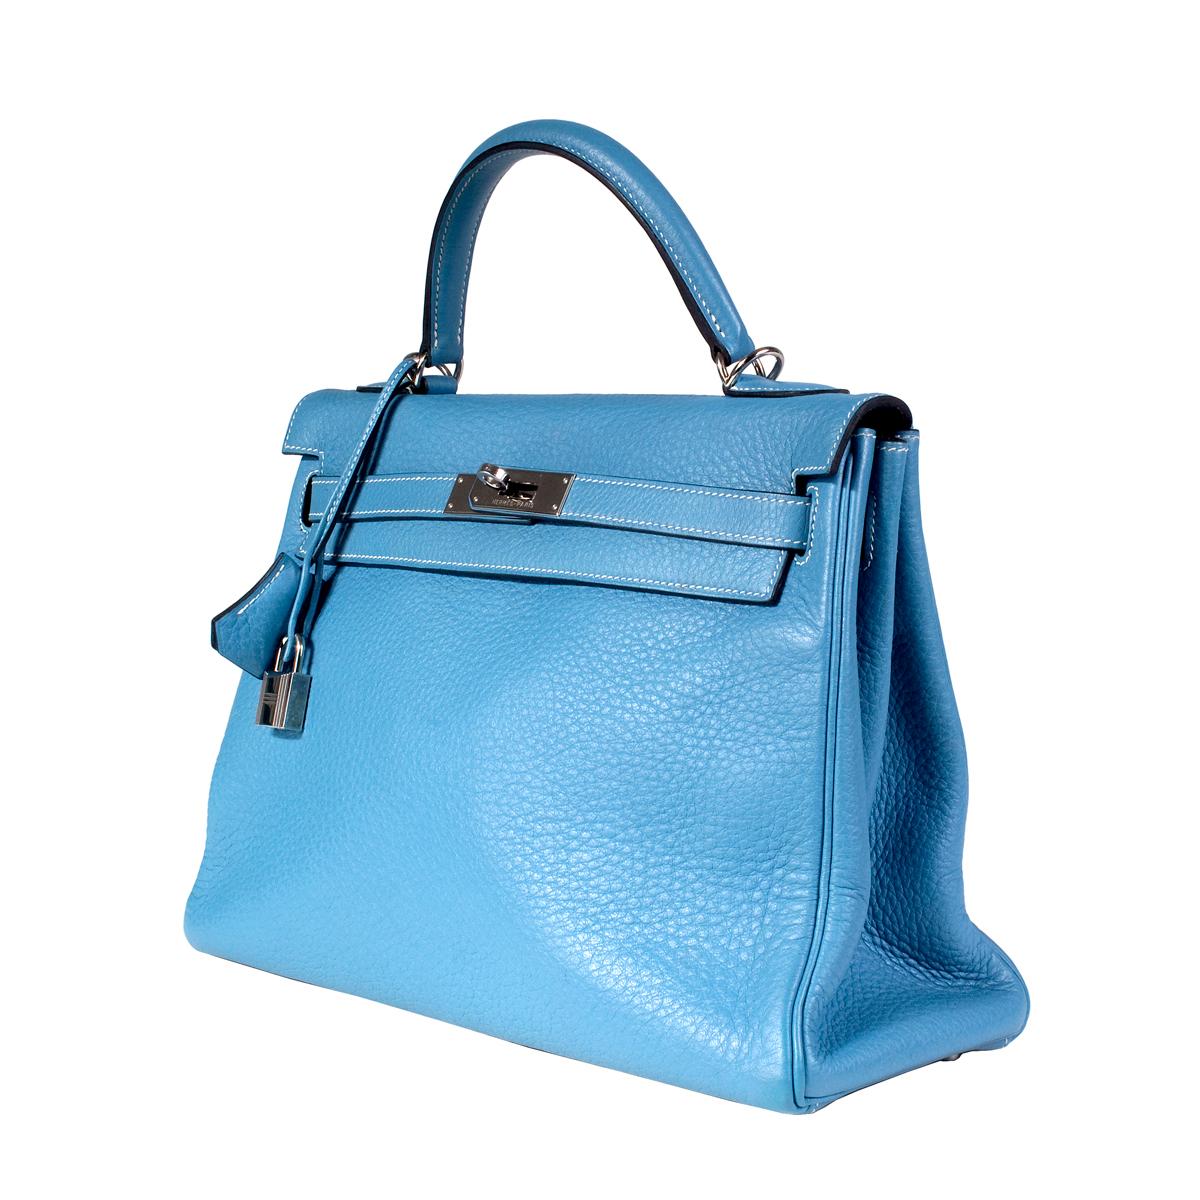 Kelly bag by Hermes from 2002
32cm size
Togo leather in blue jean color
Silver palladium hardware
Lock and key included 
Dimensions:  12.75